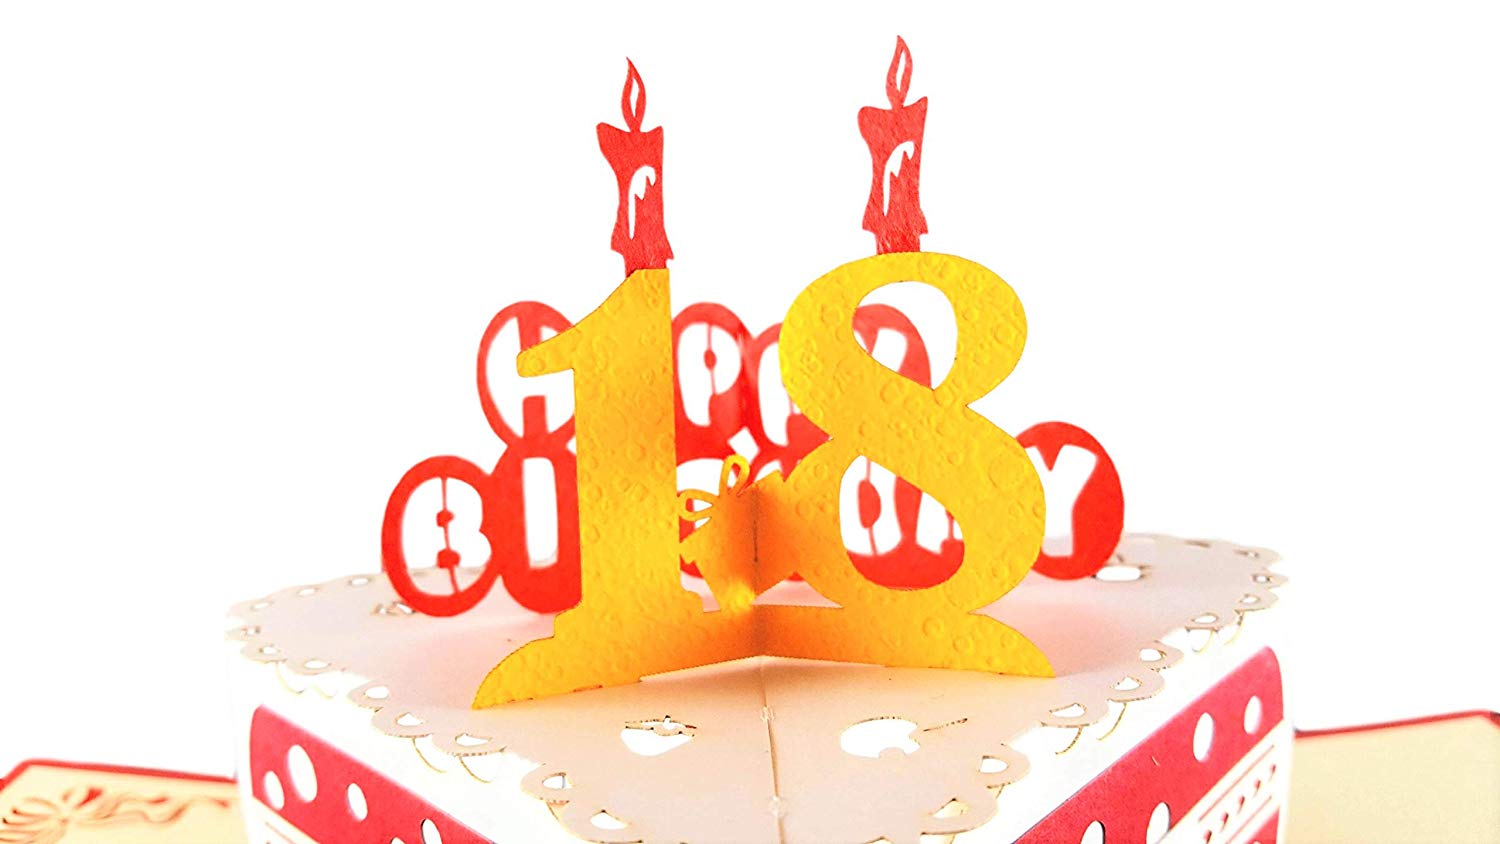 Happy 18th Birthday Cake 3D Pop Up Card - 18 th birthday wishes - 18th birthday card - 18th birthday - iGifts And Cards